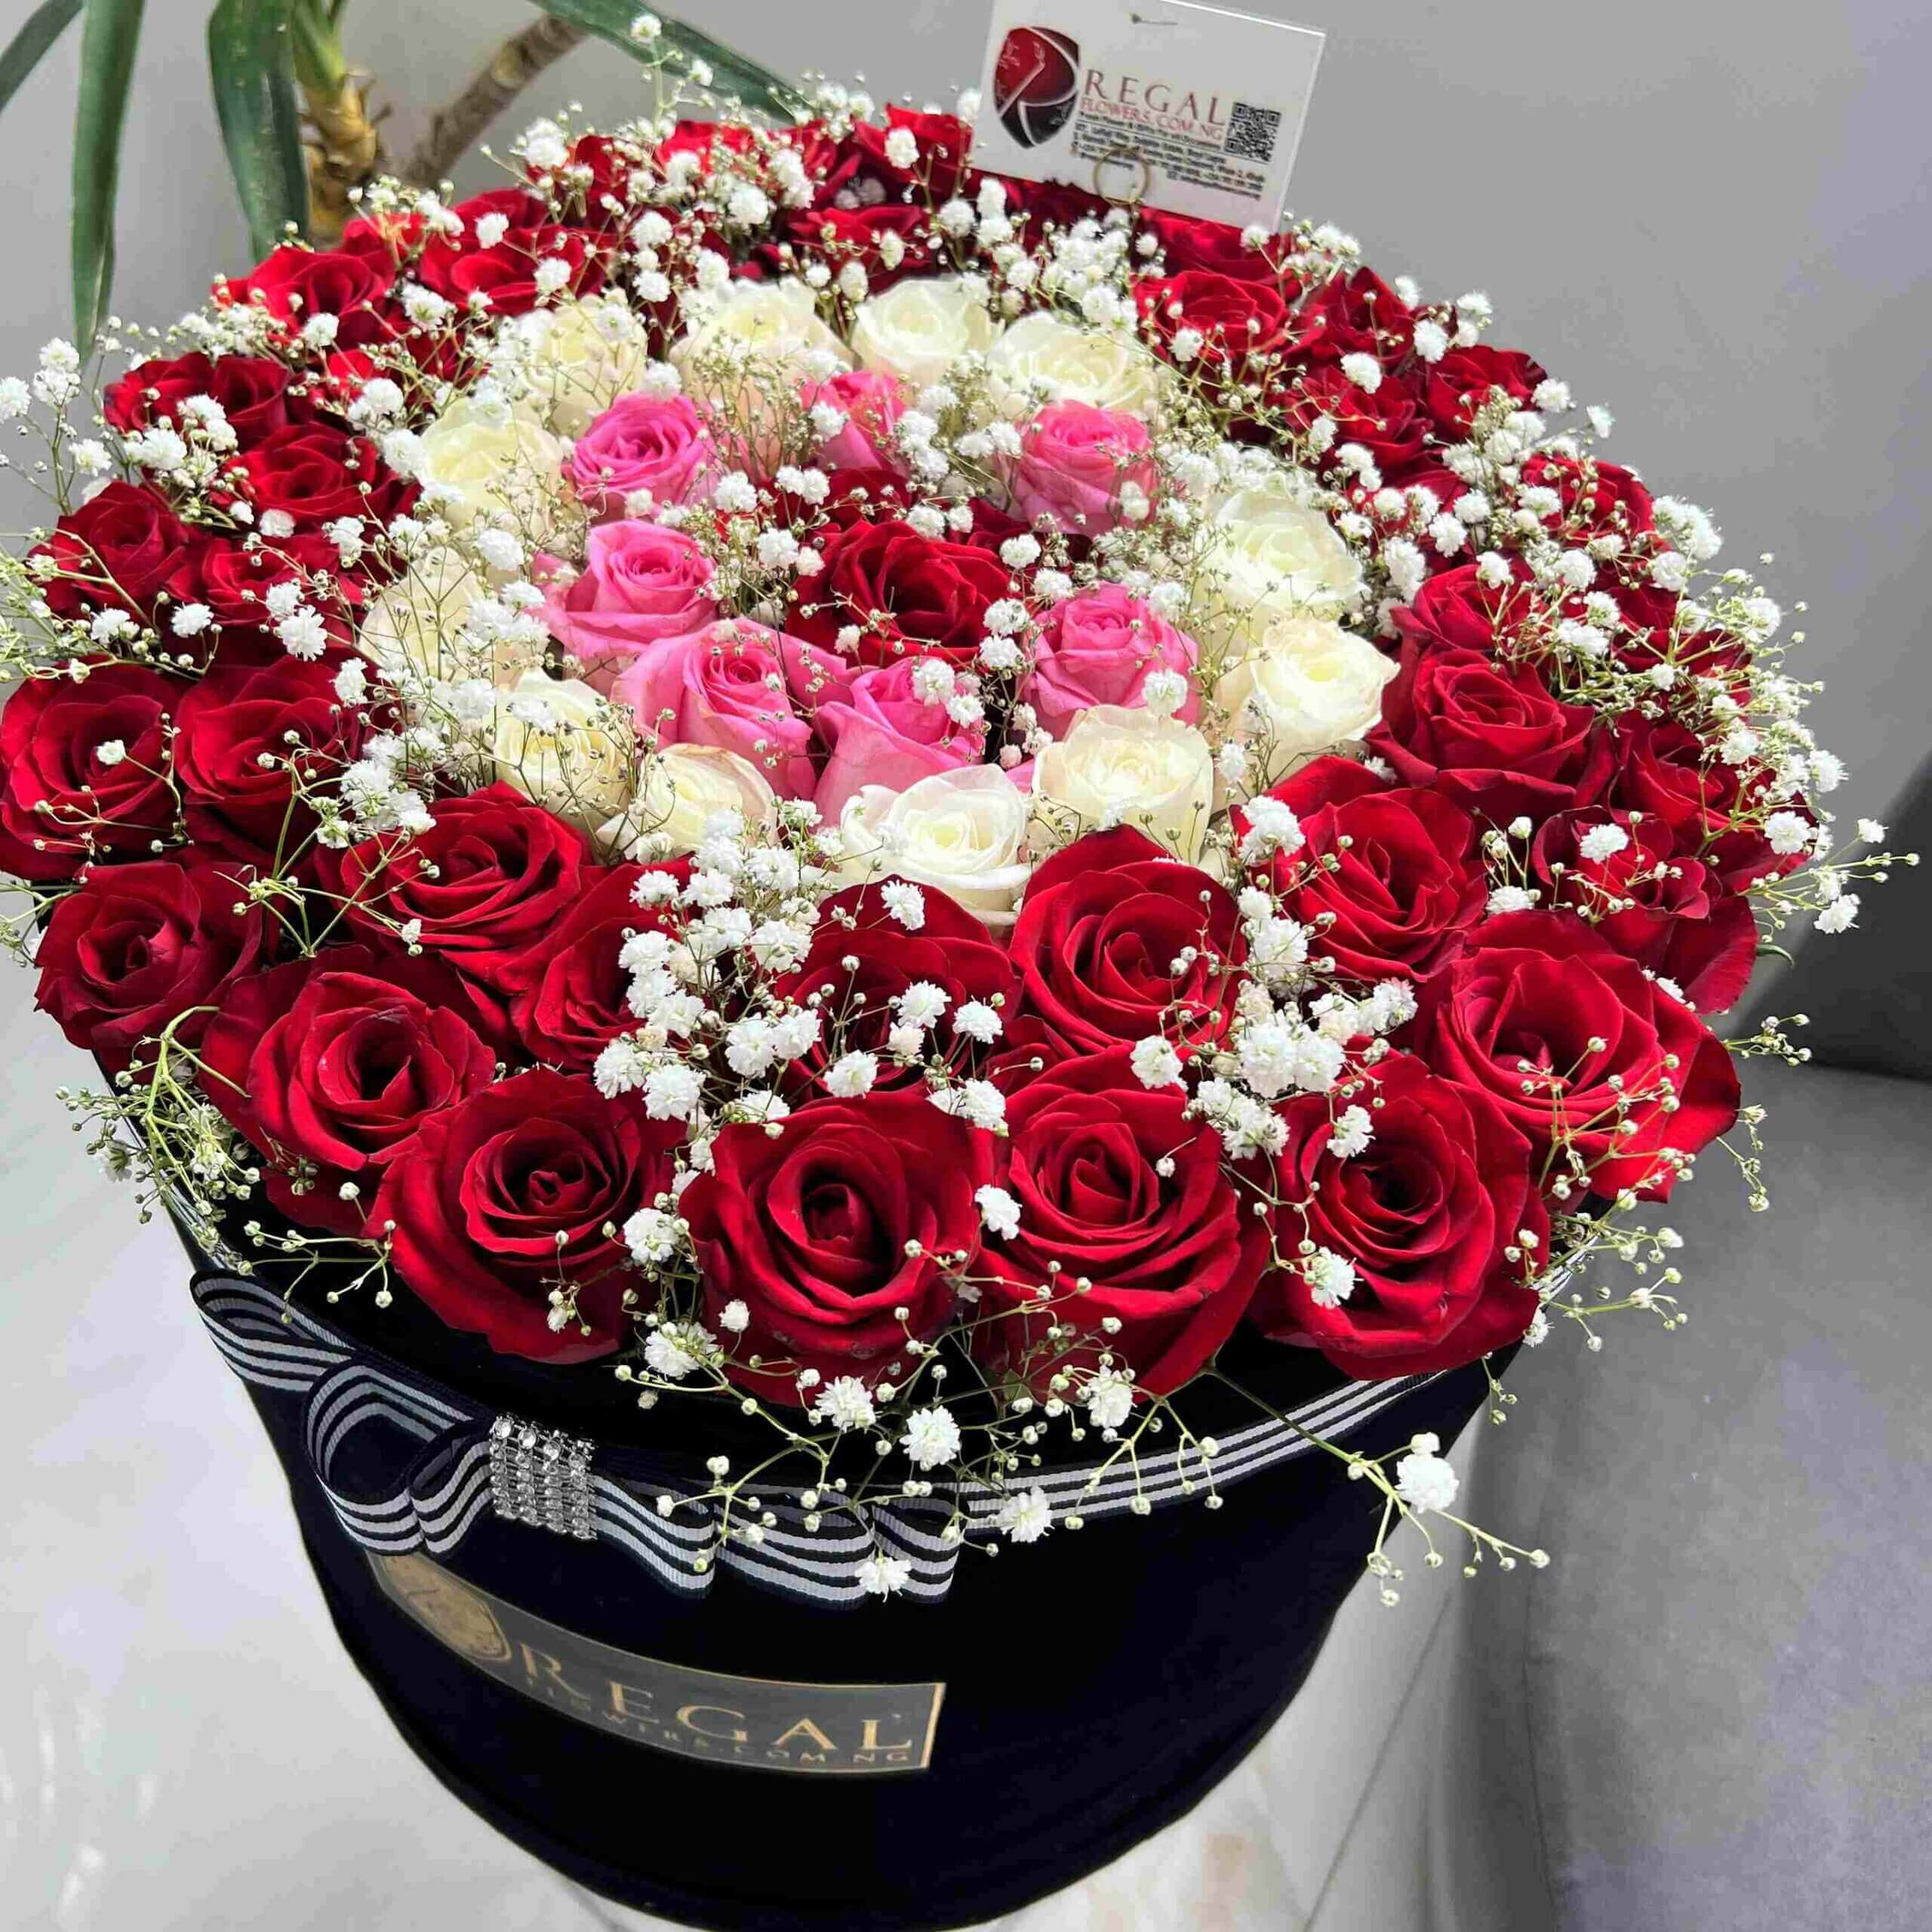 Regalflowers White Roses, Red Roses and Pink Roses Box Arrangement